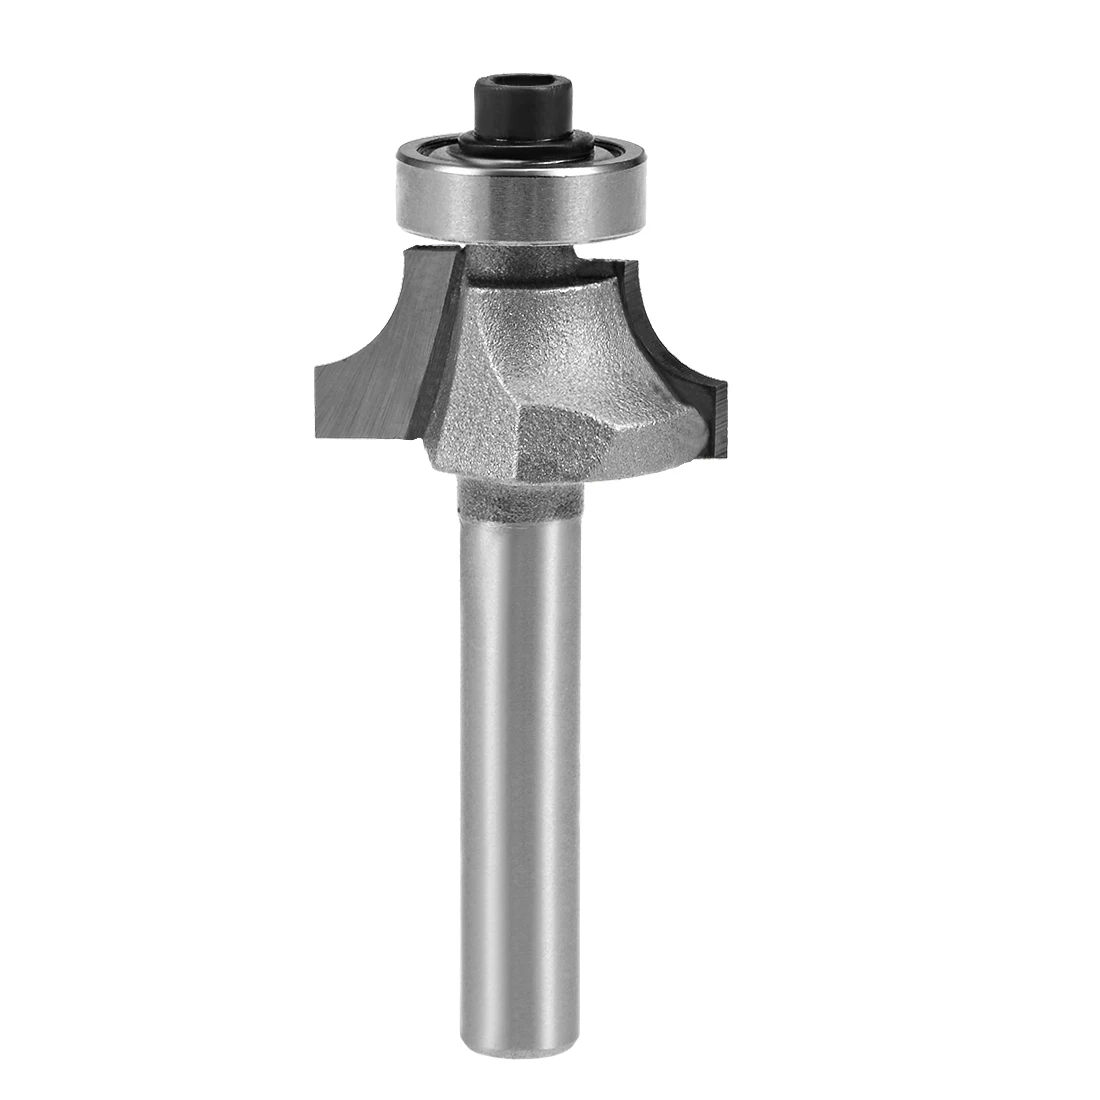 

uxcell Router Bit 1/4 Shank 3/8 inch Cutting Dia Round Over Corner 2 Flutes Tungsten Steel for Woodworking Milling Cutter Tool